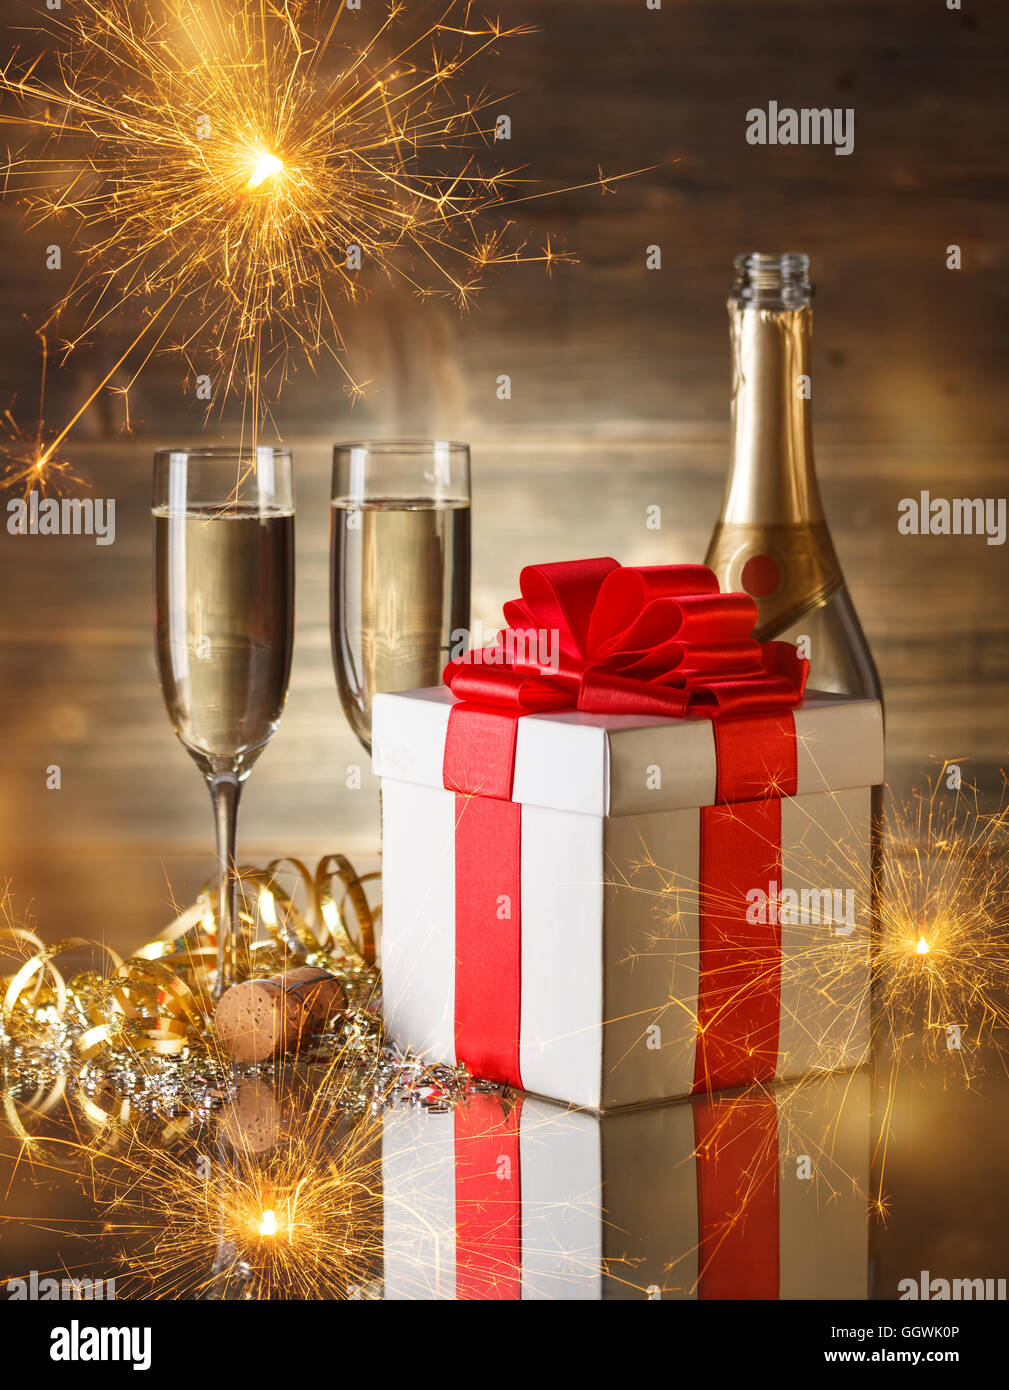 Glasses of champagne with gift box Stock Photo